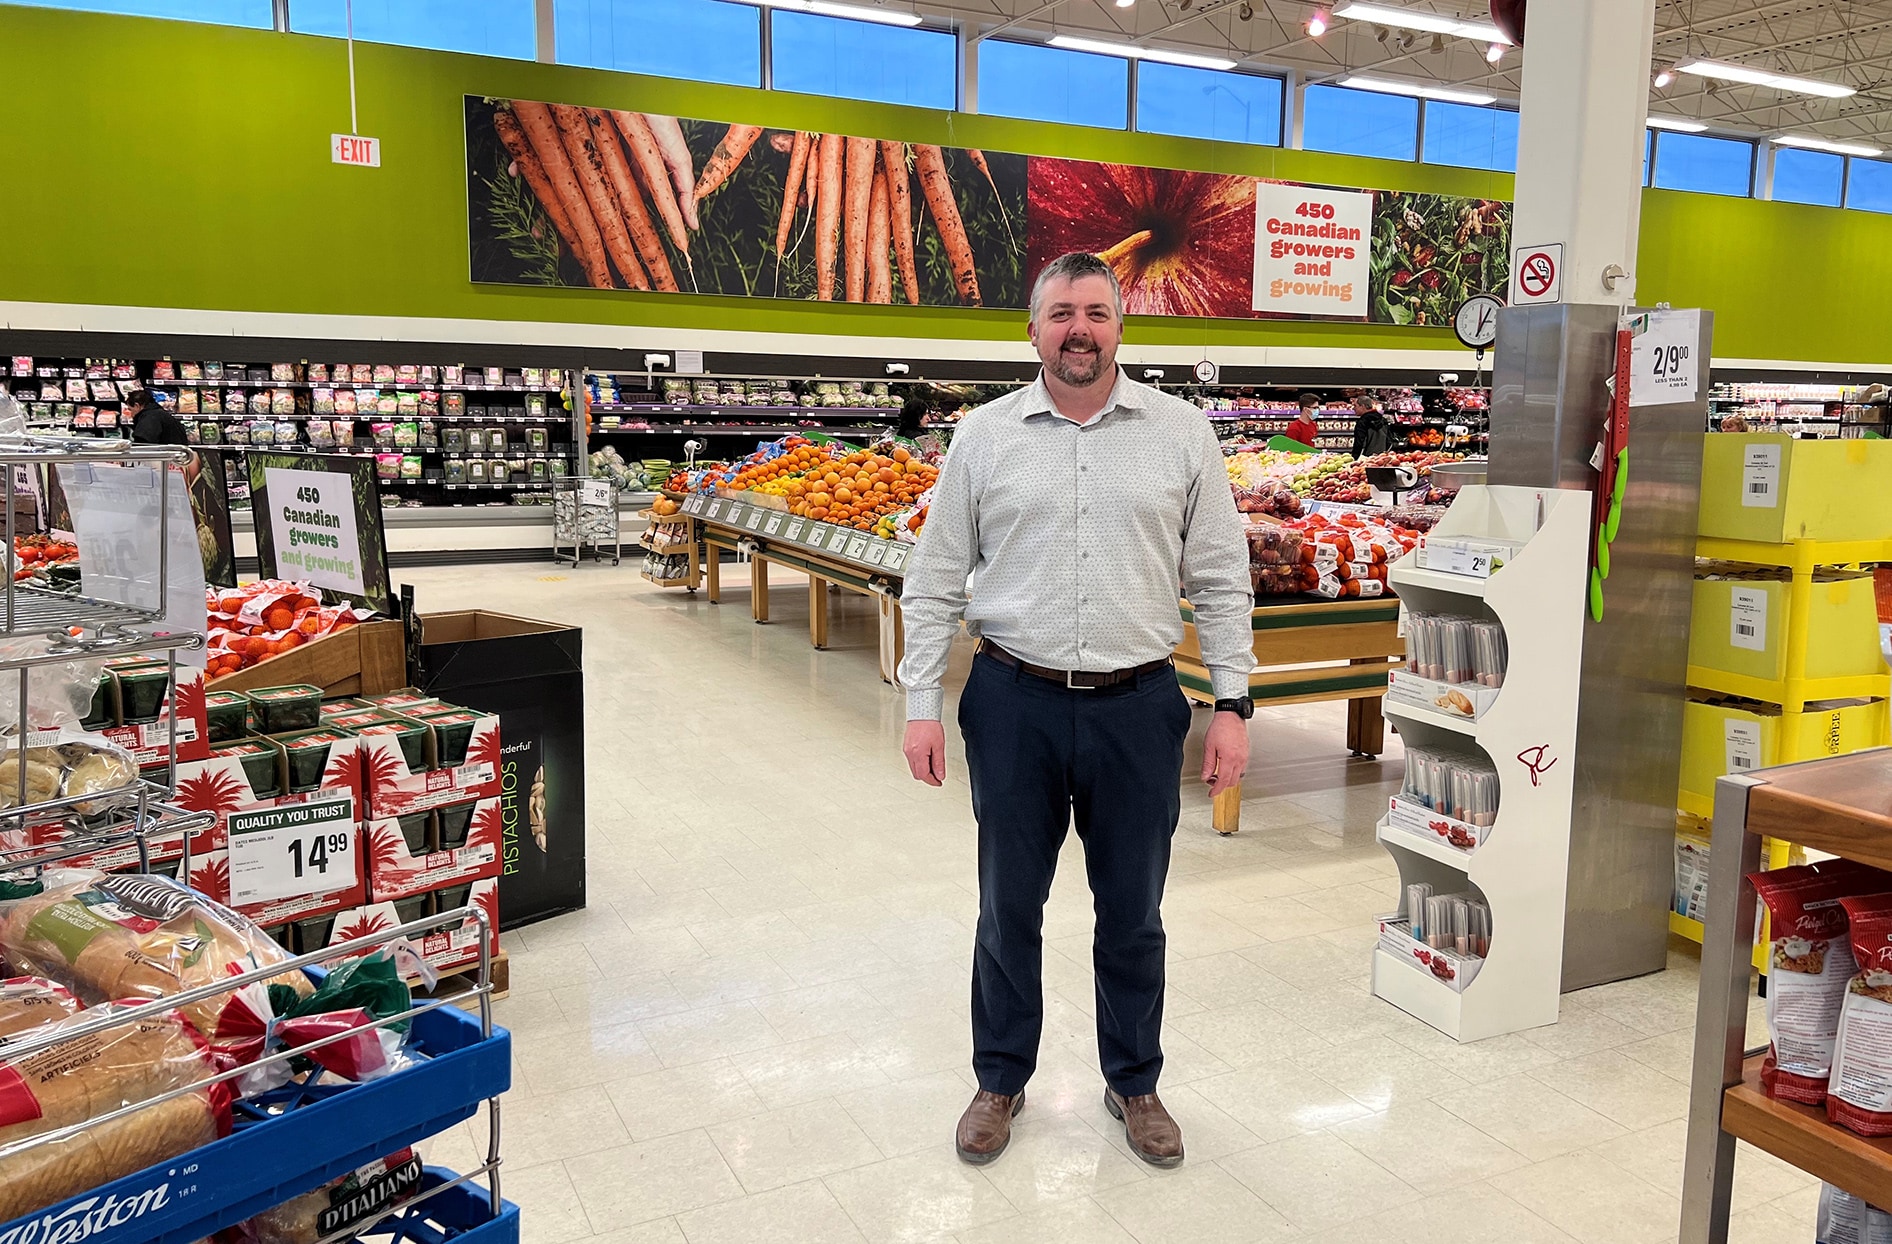 Stuart stands in the centre of his store’s floor